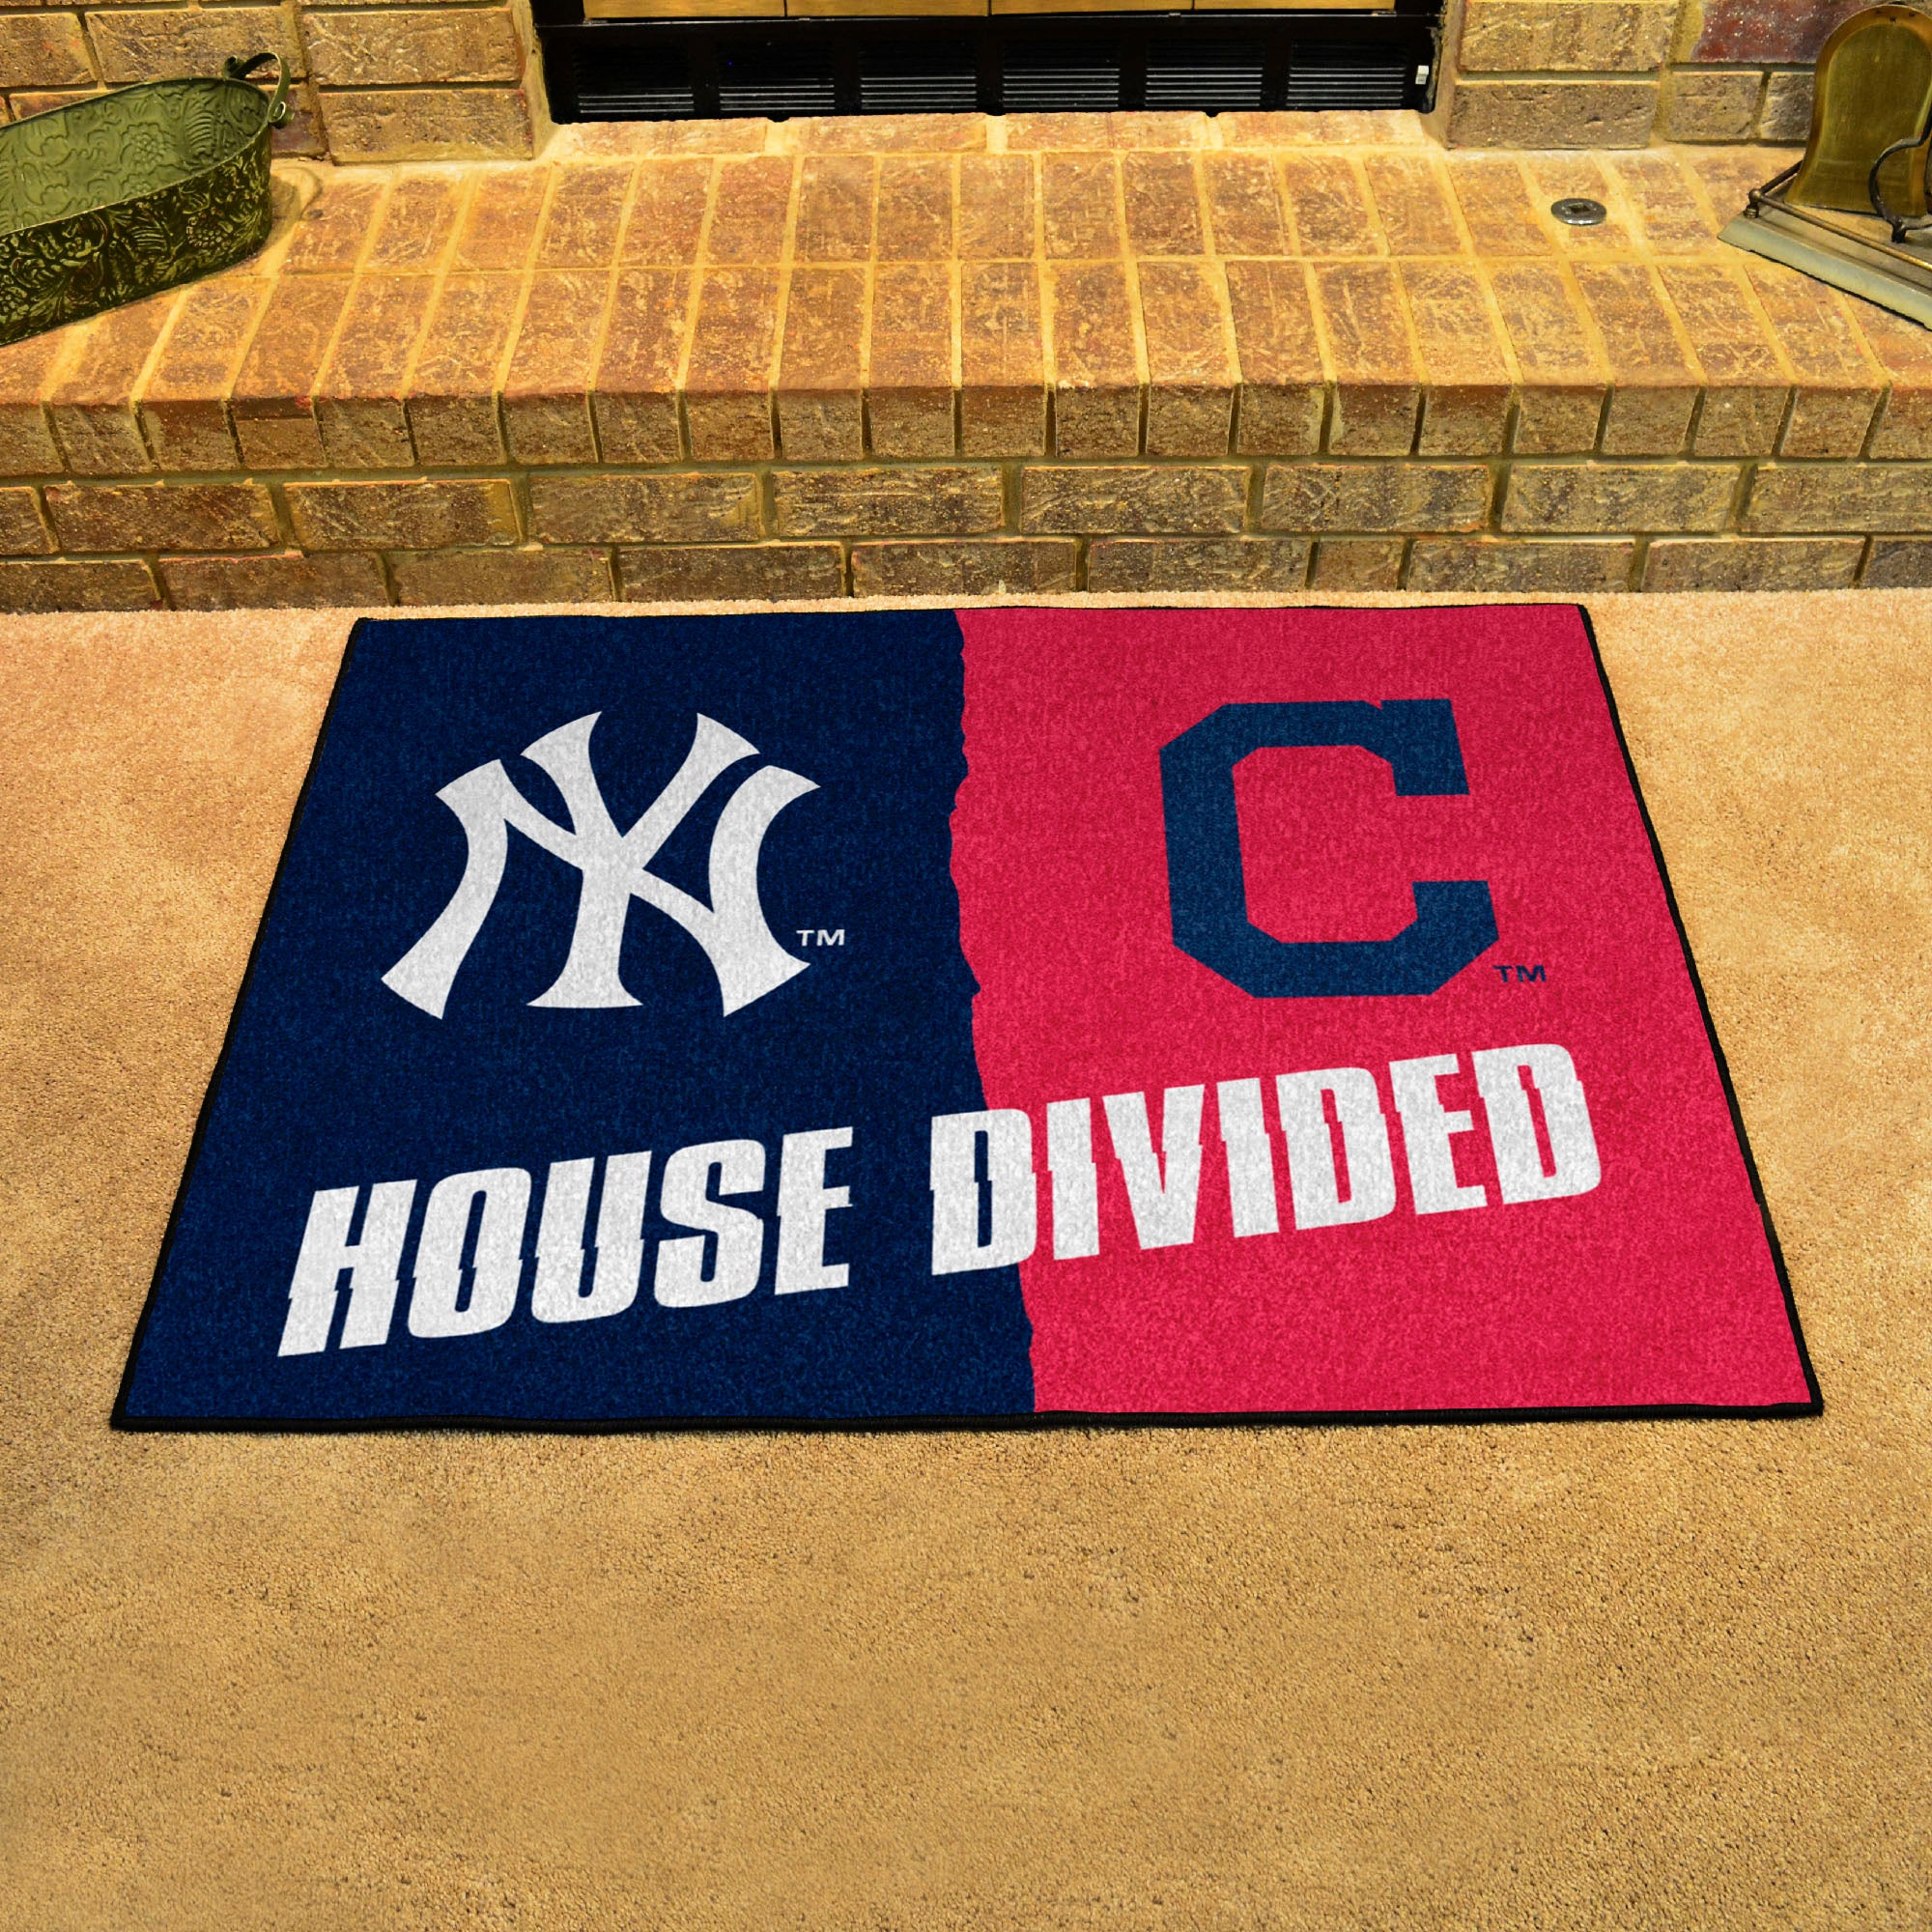 FANMATS, MLB House Divided - White Sox / Cubs House Divided Rug